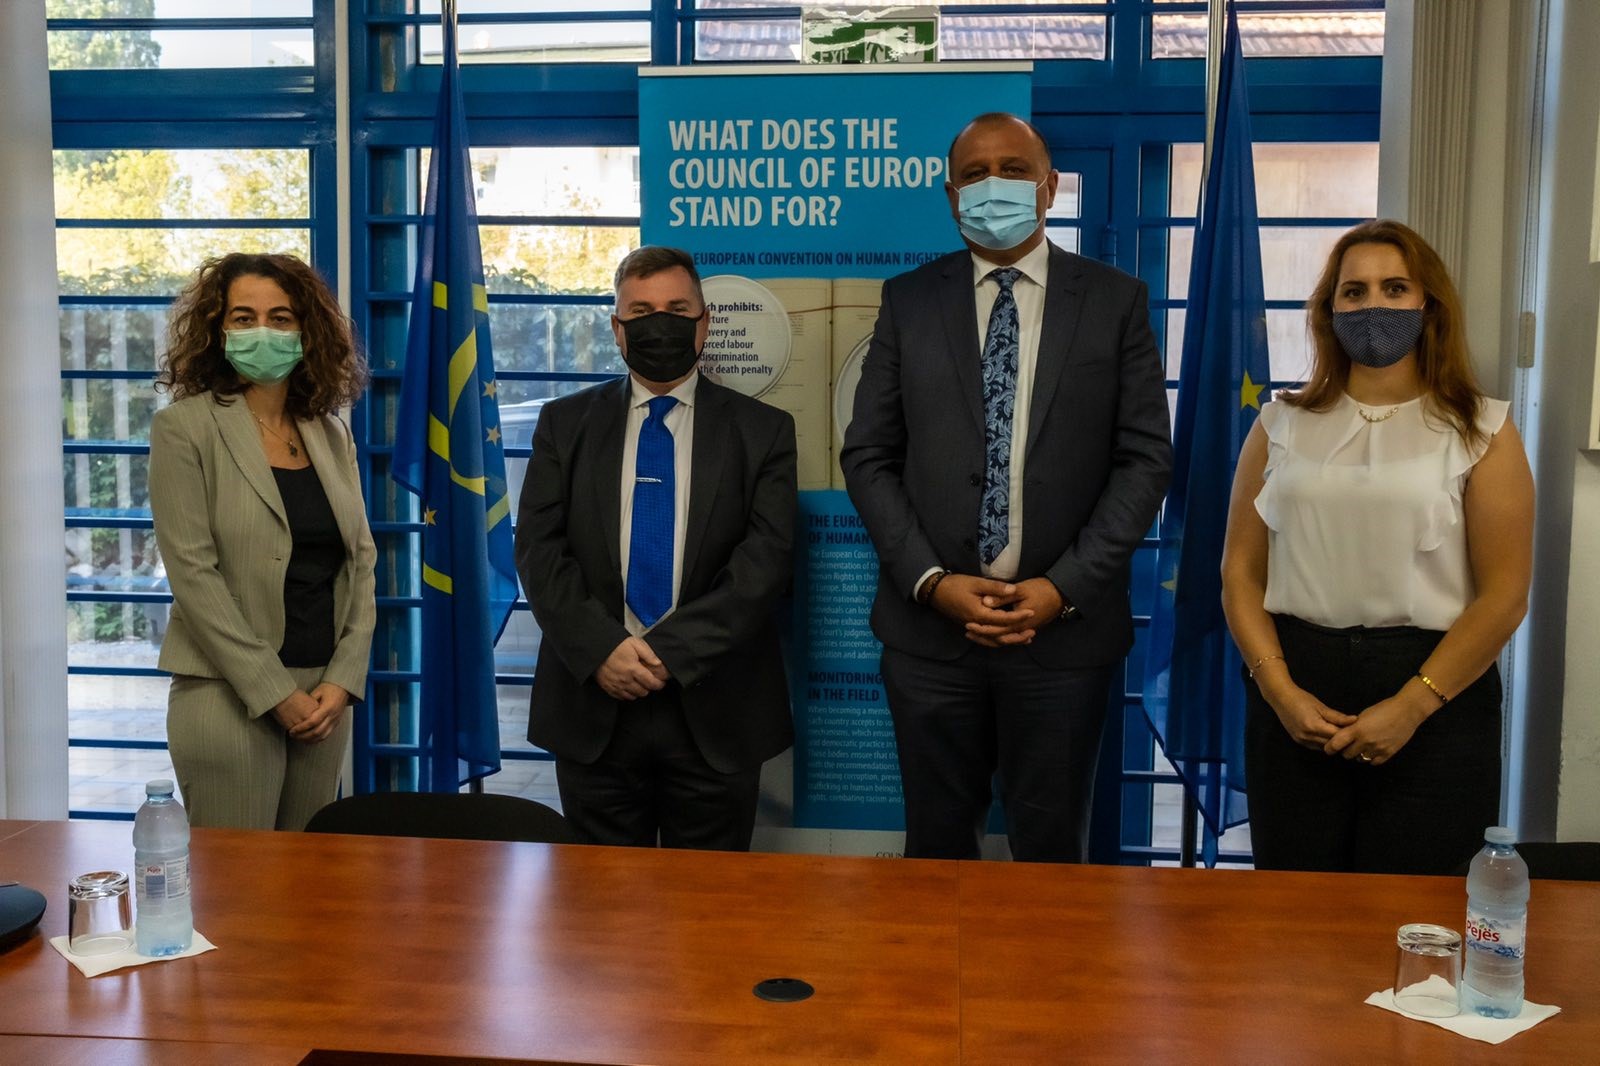 Head of the Council of Europe Office in Pristina meets with the Deputy Minister of Justice and National Coordinator on Domestic Violence in Kosovo*